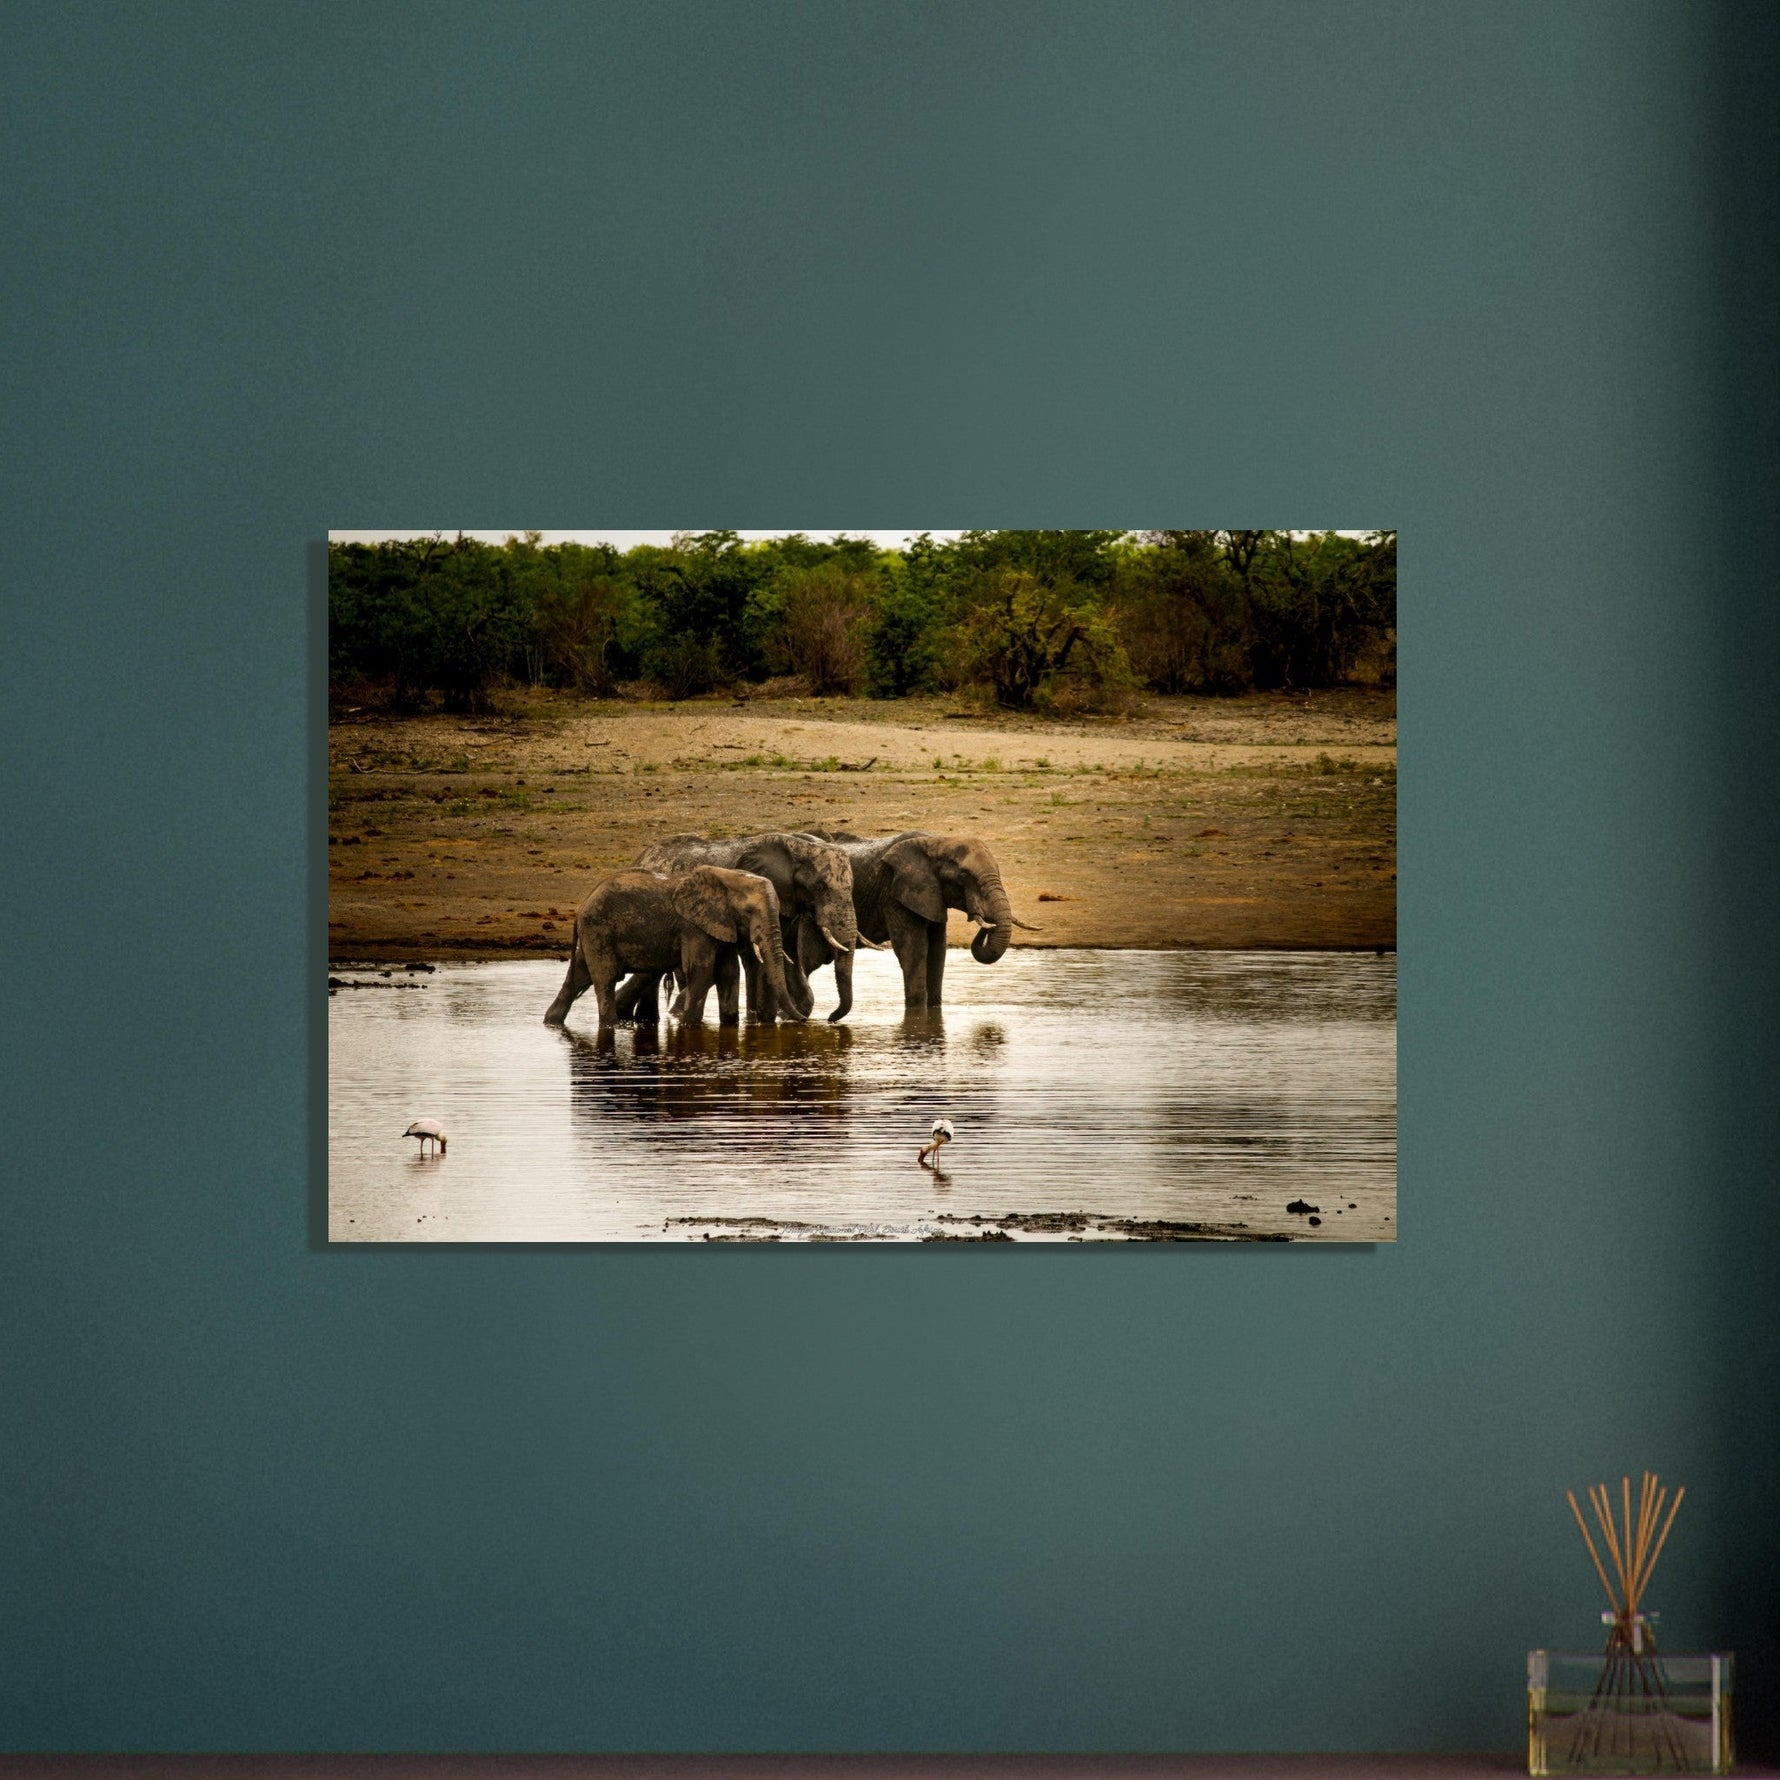 OPTIMIZE_BACKUP_PRODUCT_A wall art piece featuring three elephants in a water scene